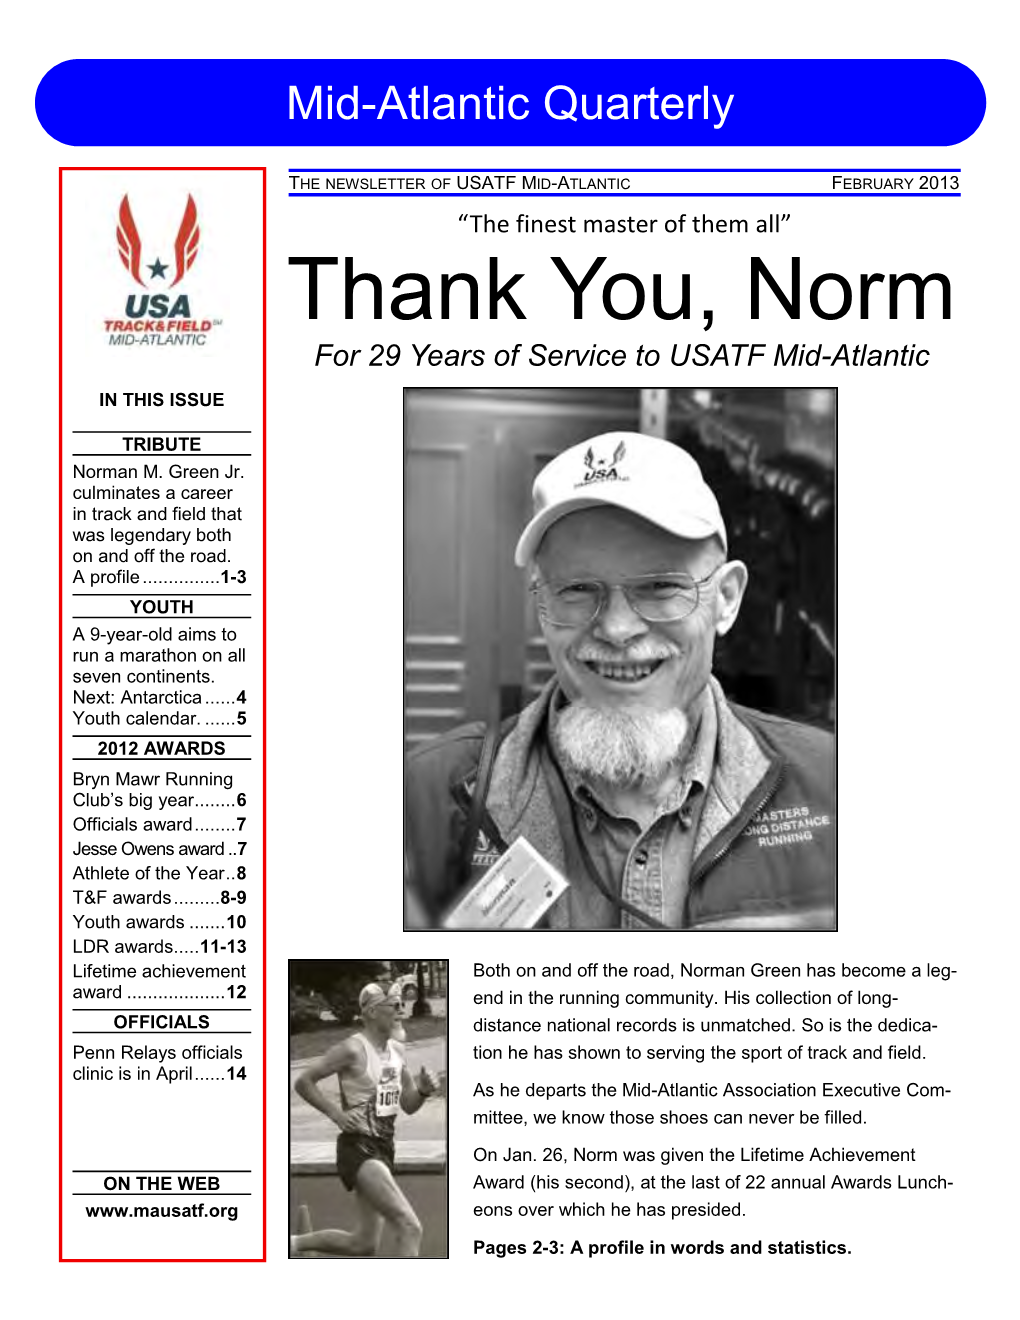 Thank You, Norm for 29 Years of Service to USATF Mid-Atlantic